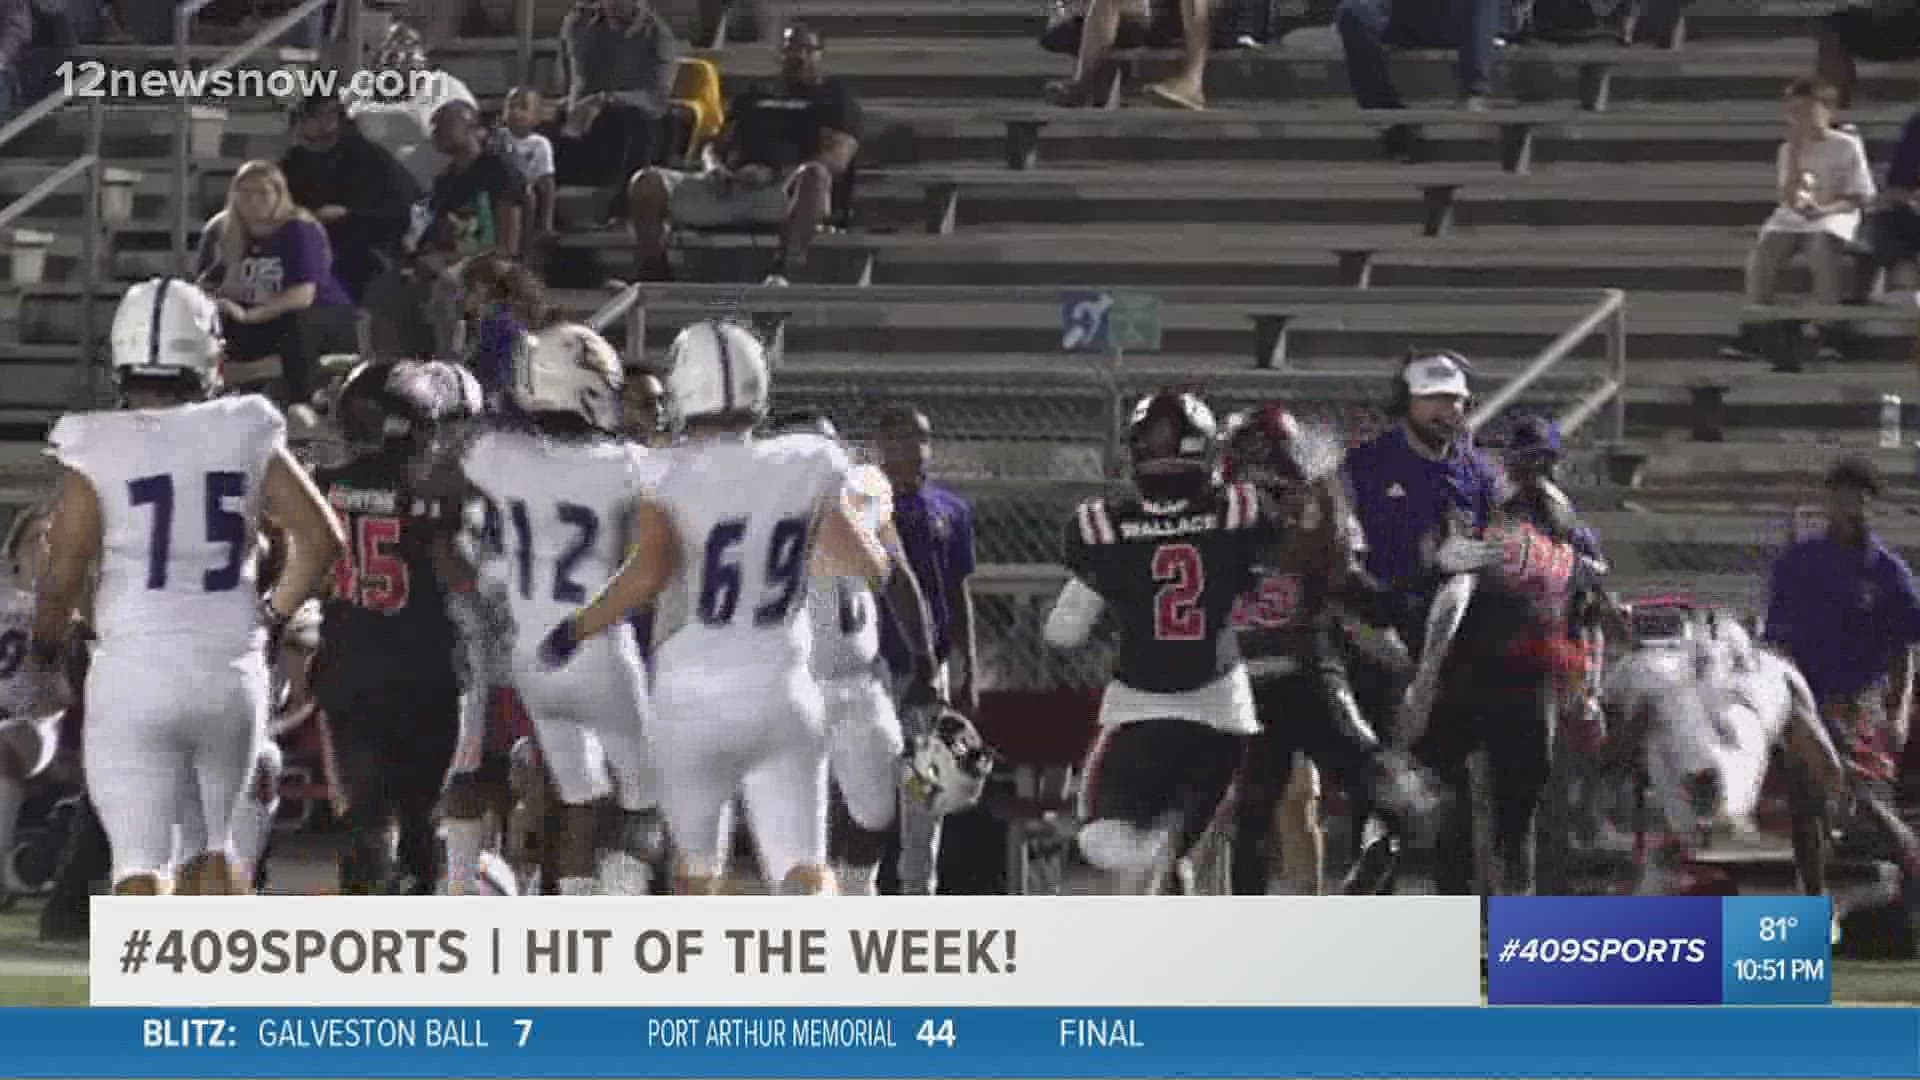 Get all your high school football scores and more at http://12NewsNow.com/409Sports